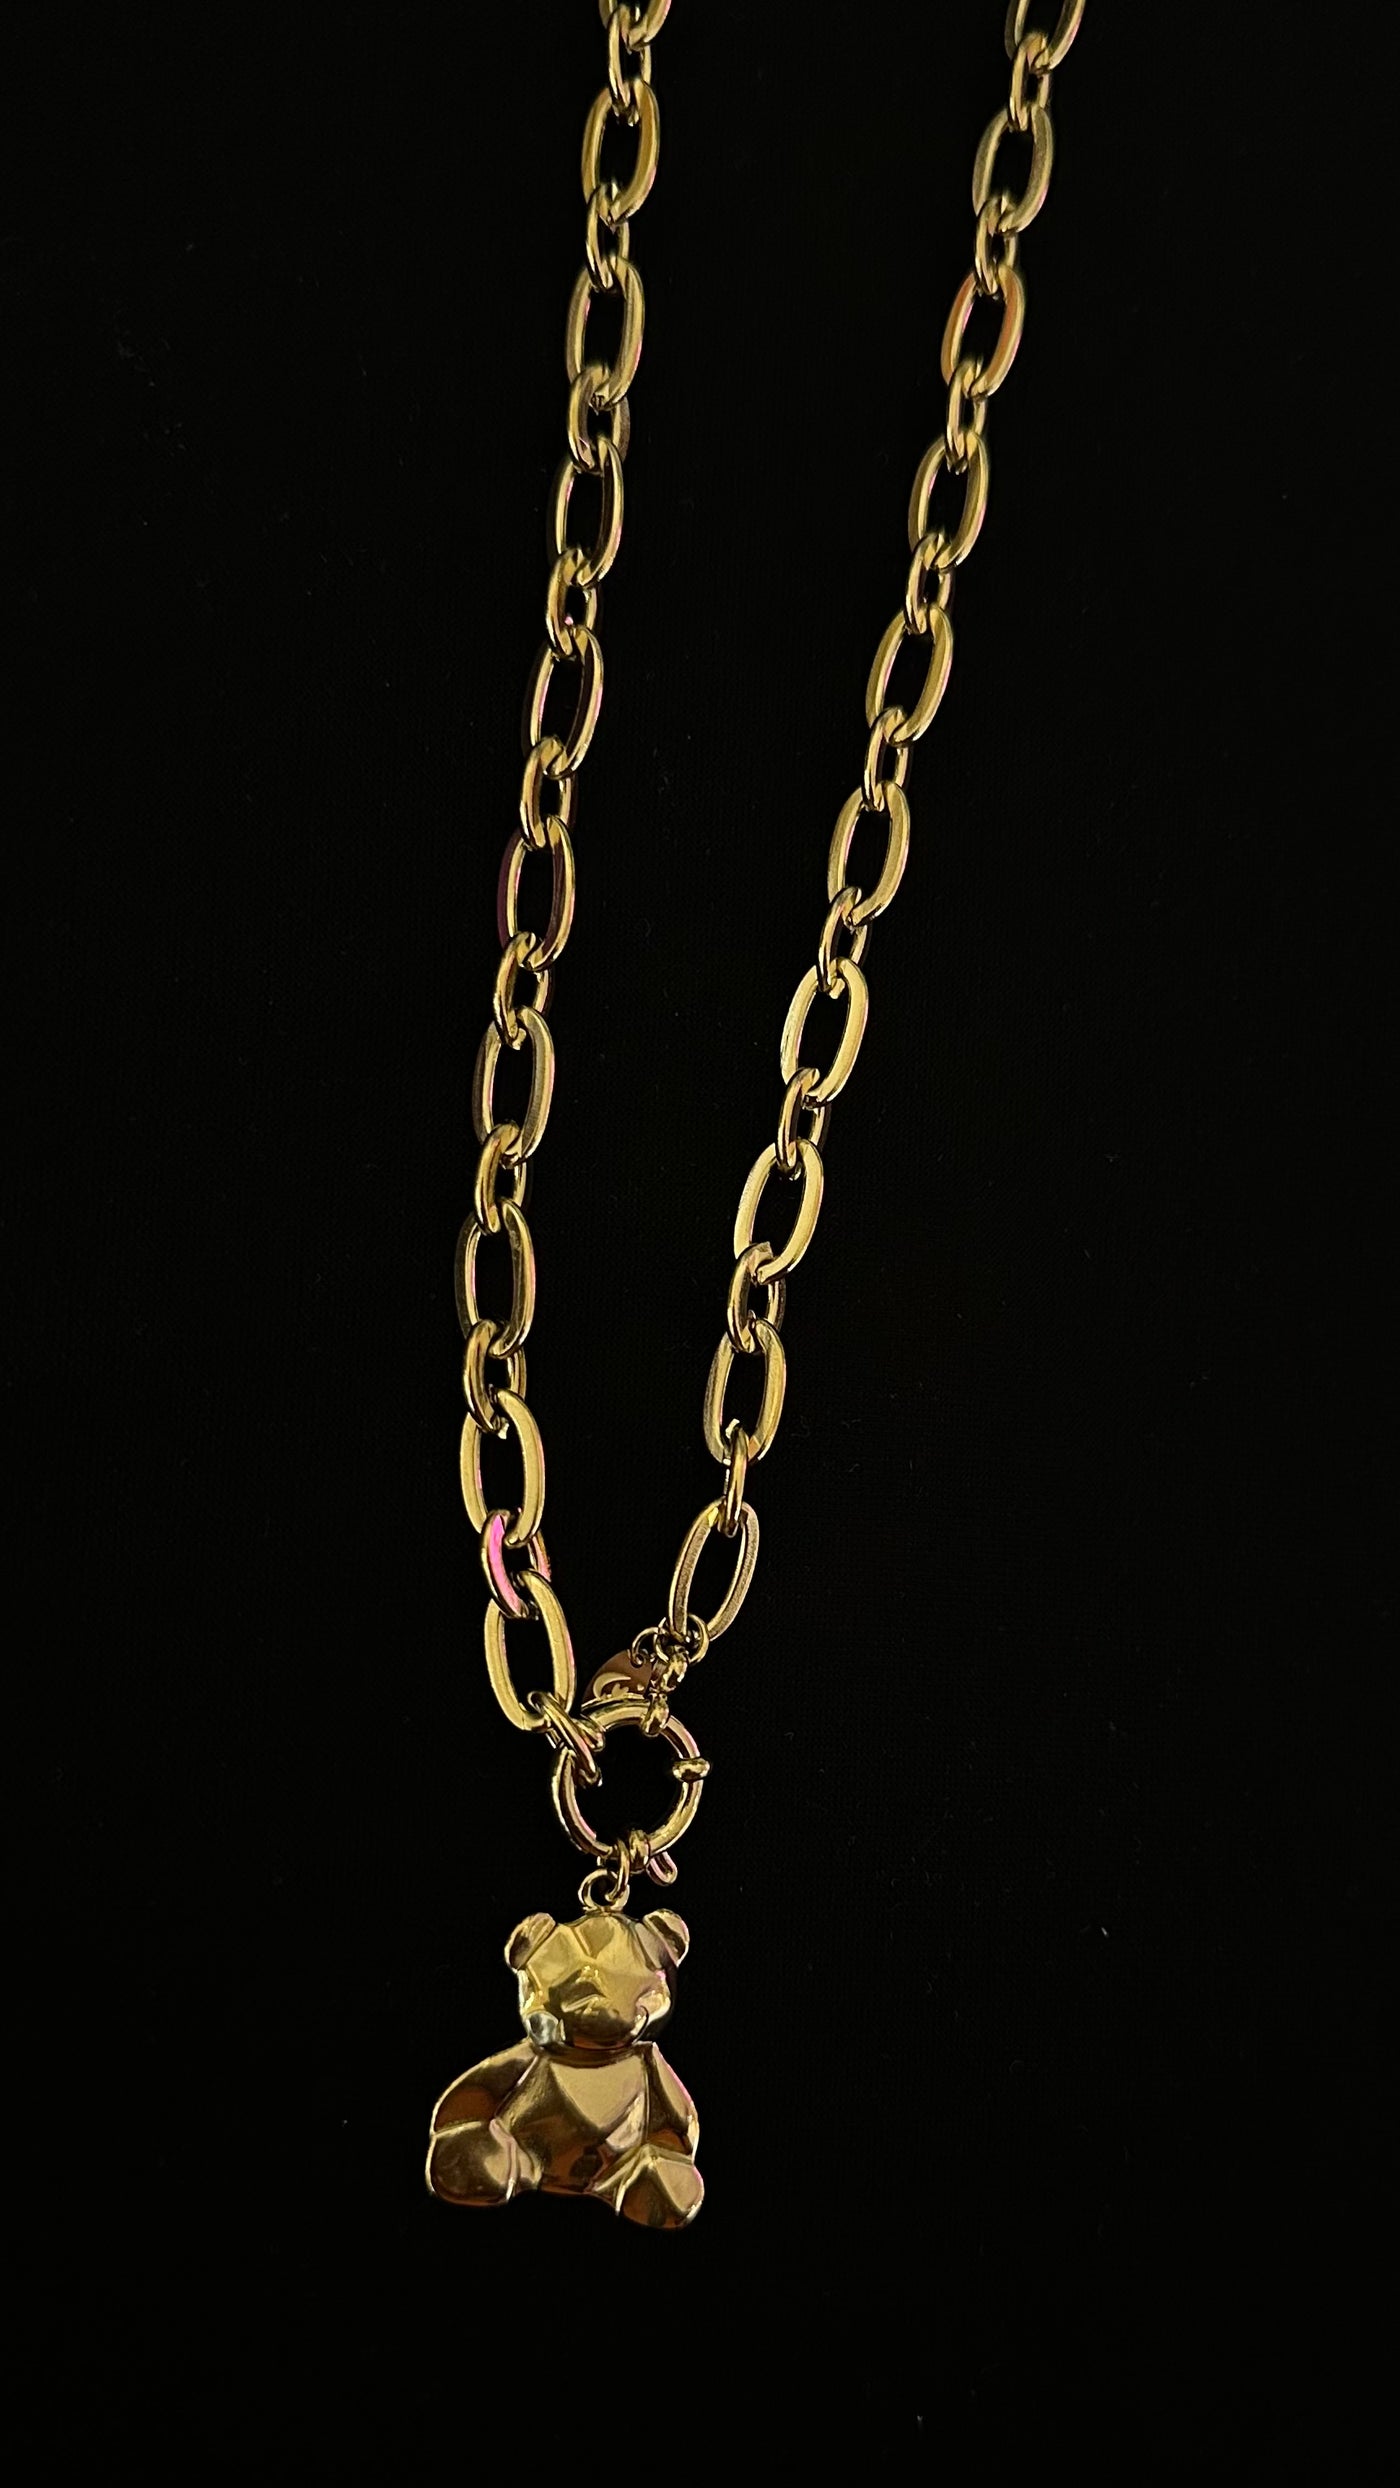 BEAR CHAIN STAINLES STEEL